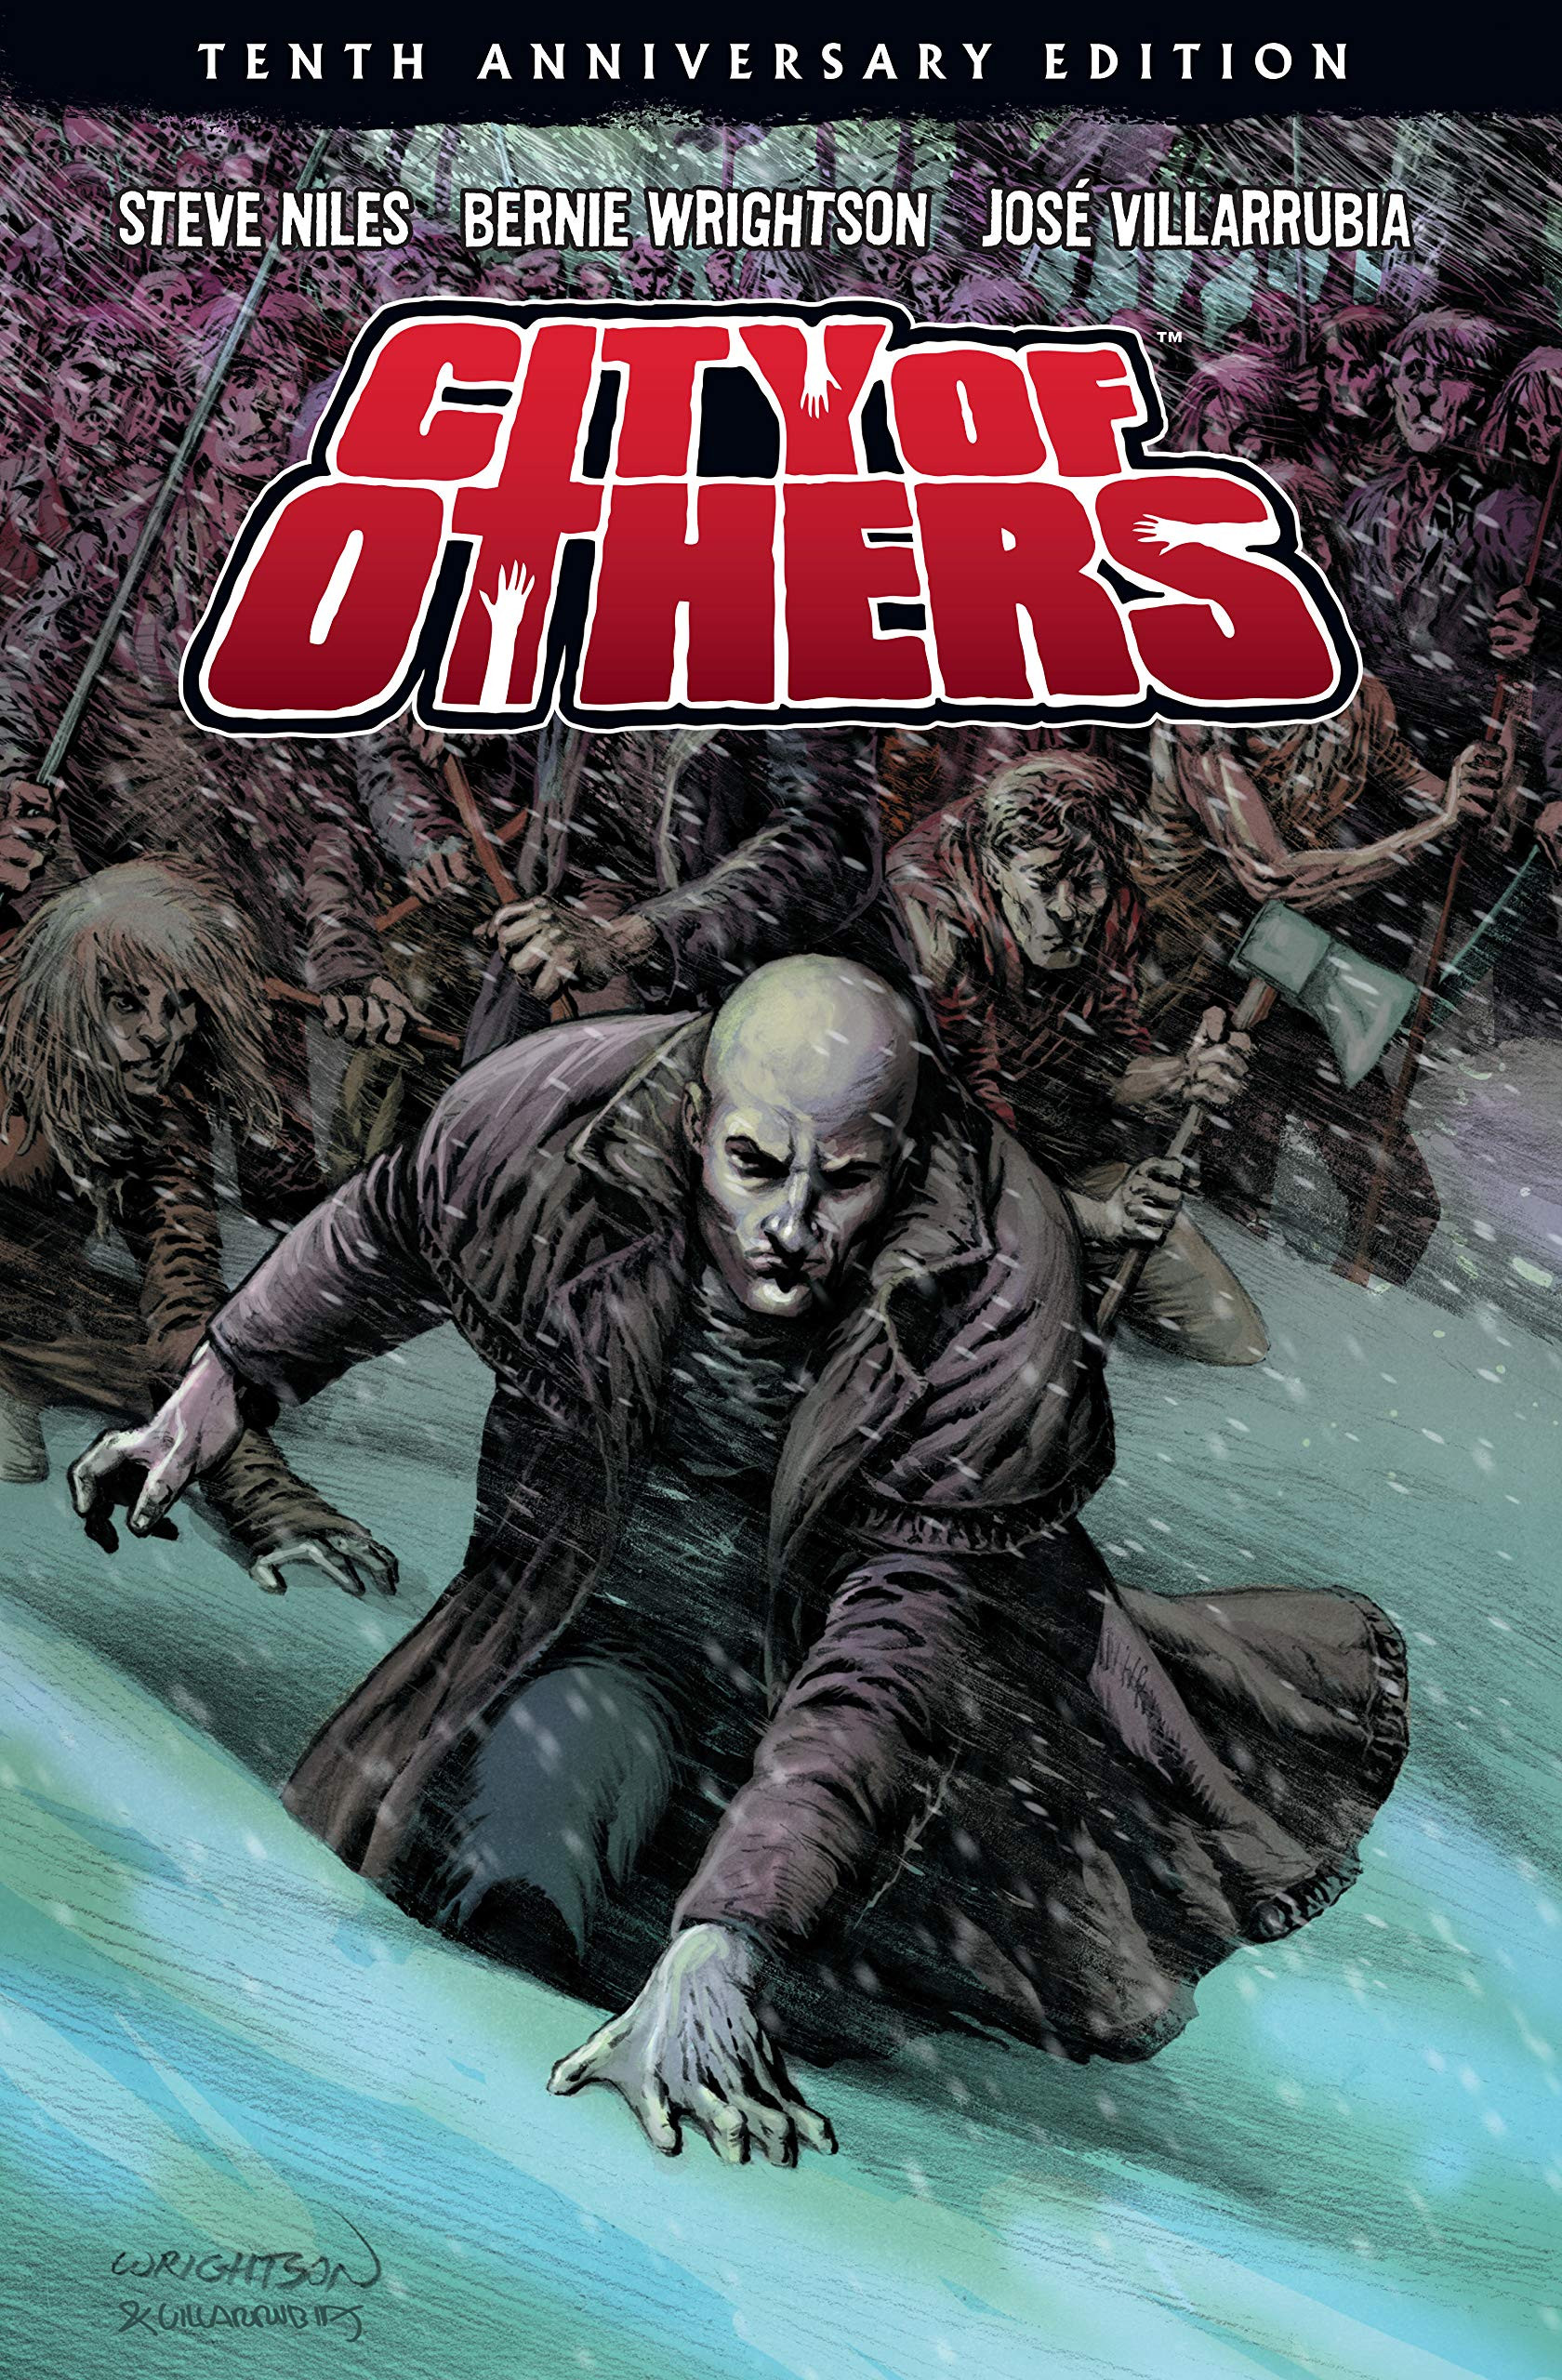 City of Others - Tenth Anniversary Edition